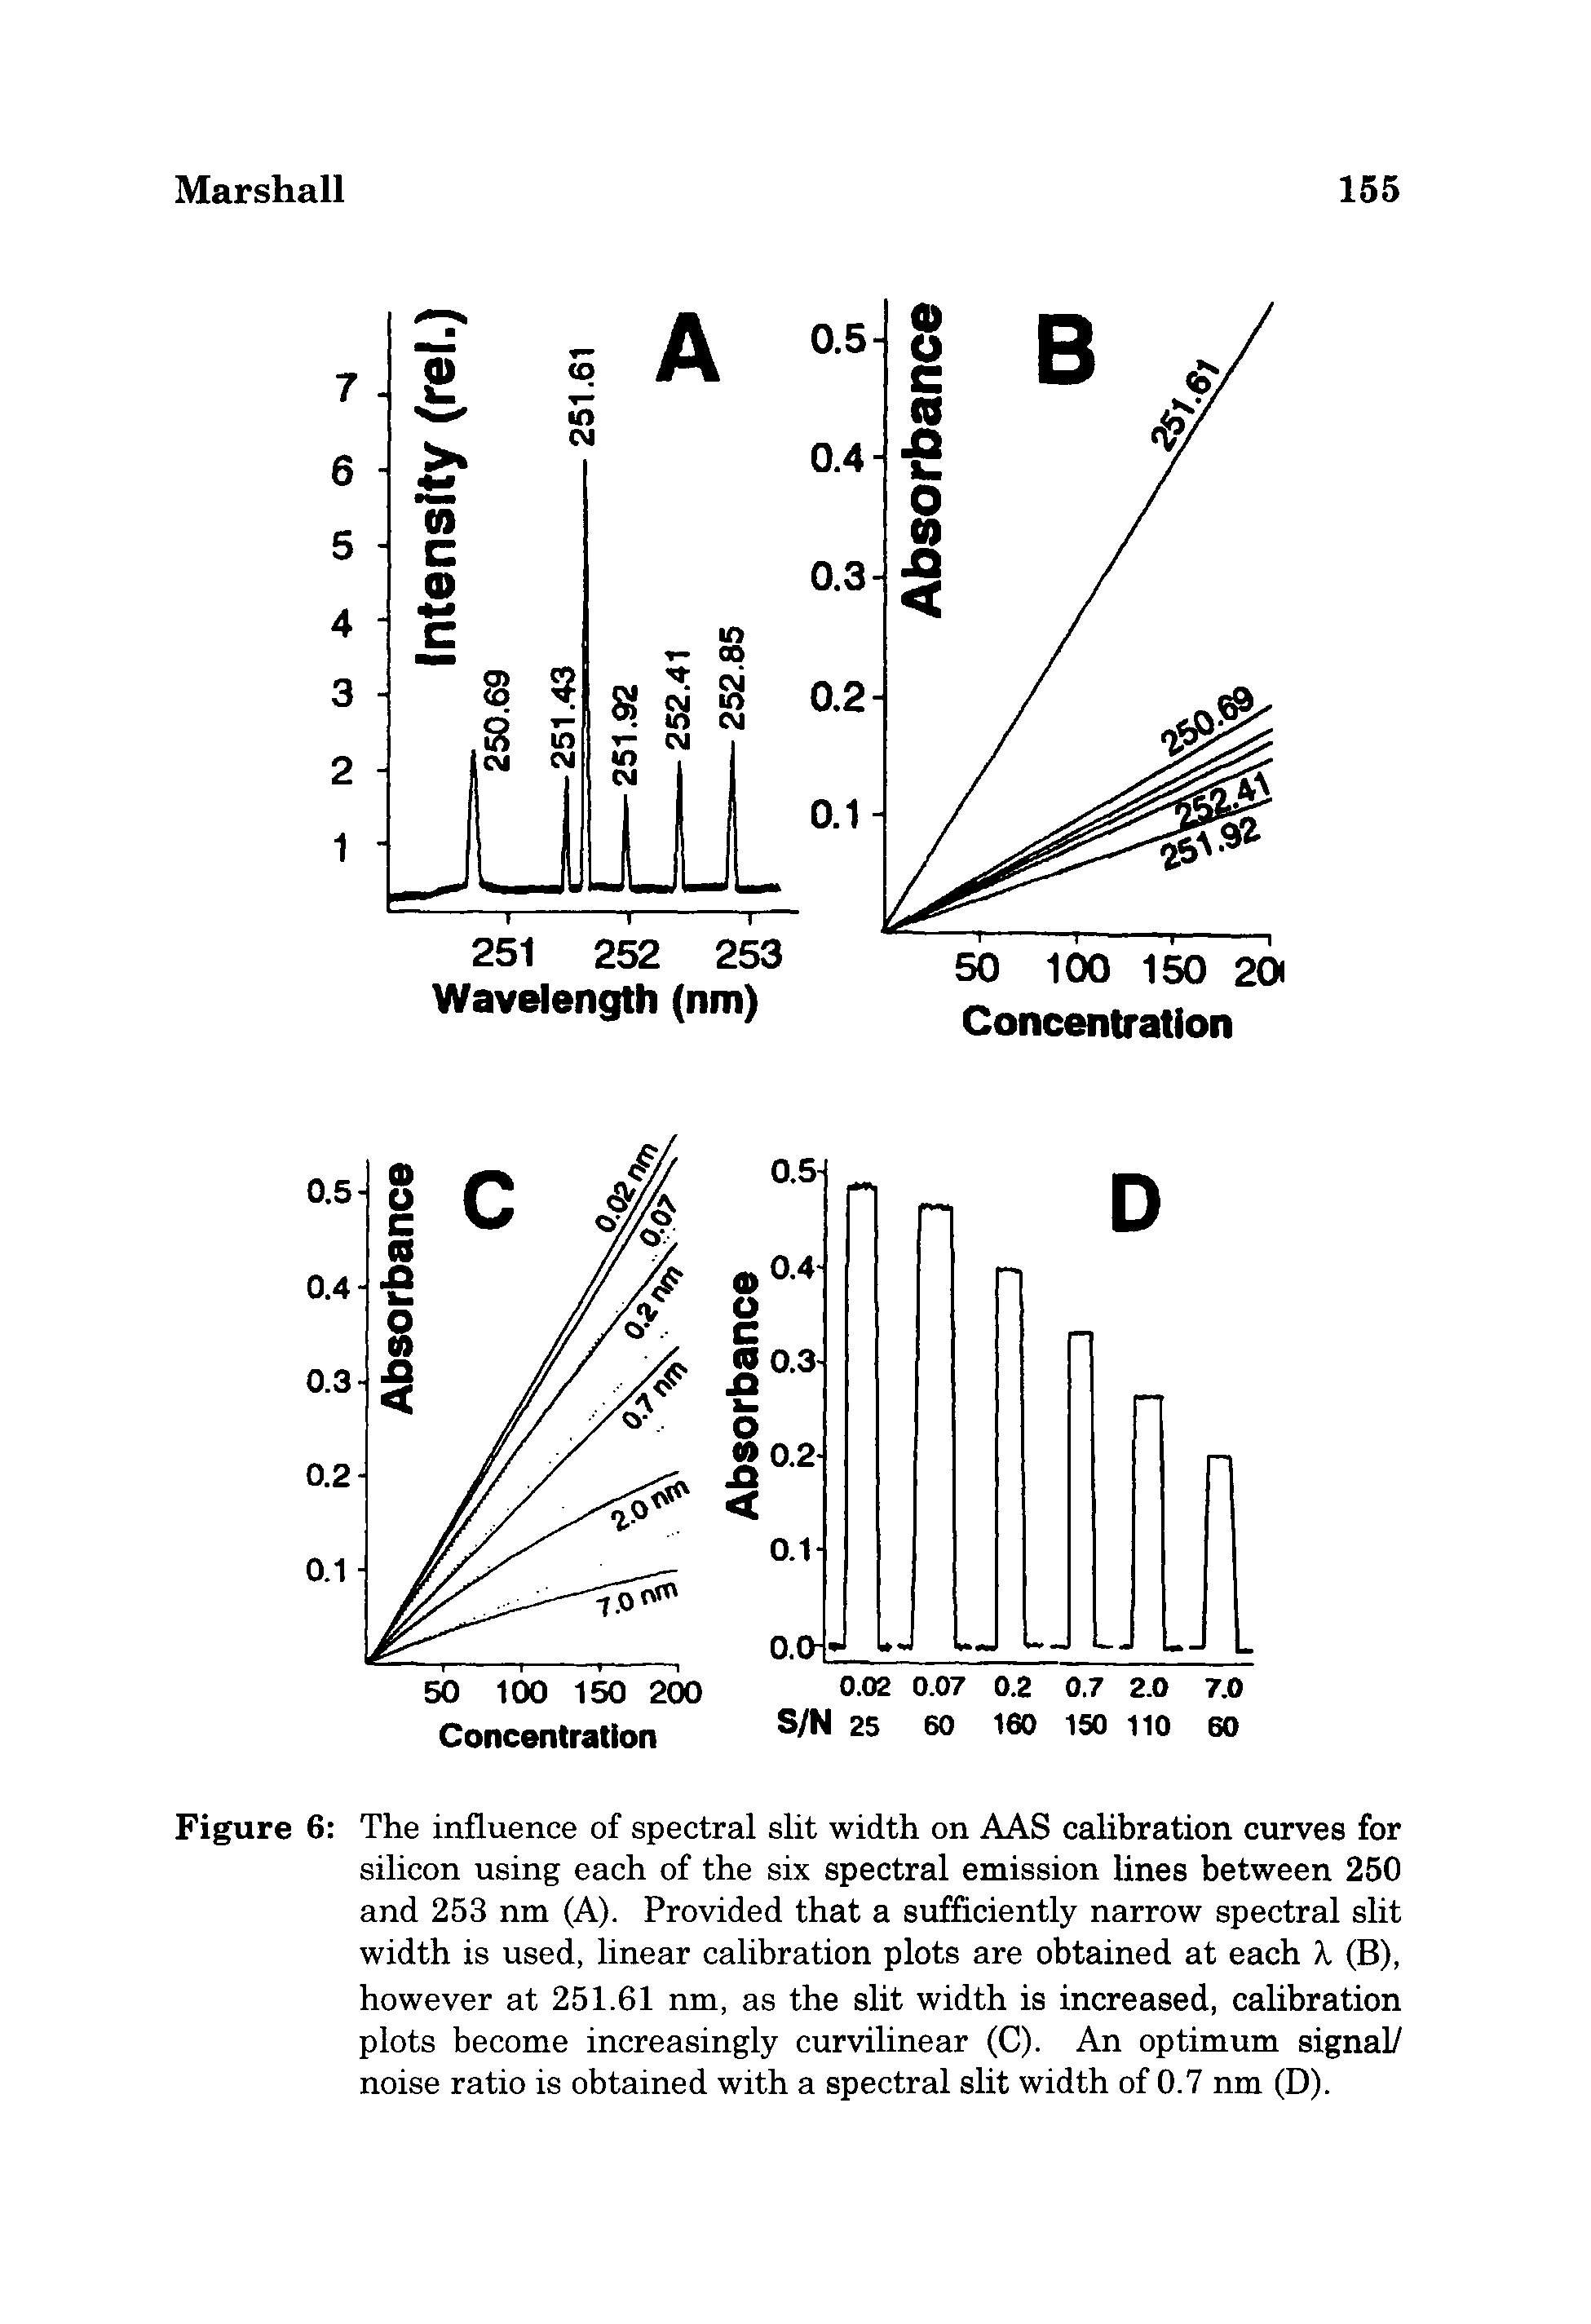 Figure 6 The influence of spectral slit width on AAS calibration curves for silicon using each of the six spectral emission lines between 250 and 253 nm (A). Provided that a sufficiently narrow spectral slit width is used, linear calibration plots are obtained at each (B), however at 251.61 nm, as the slit width is increased, calibration plots become increasingly curvilinear (C). An optimum signal/ noise ratio is obtained with a spectral slit width of 0.7 nm (D).